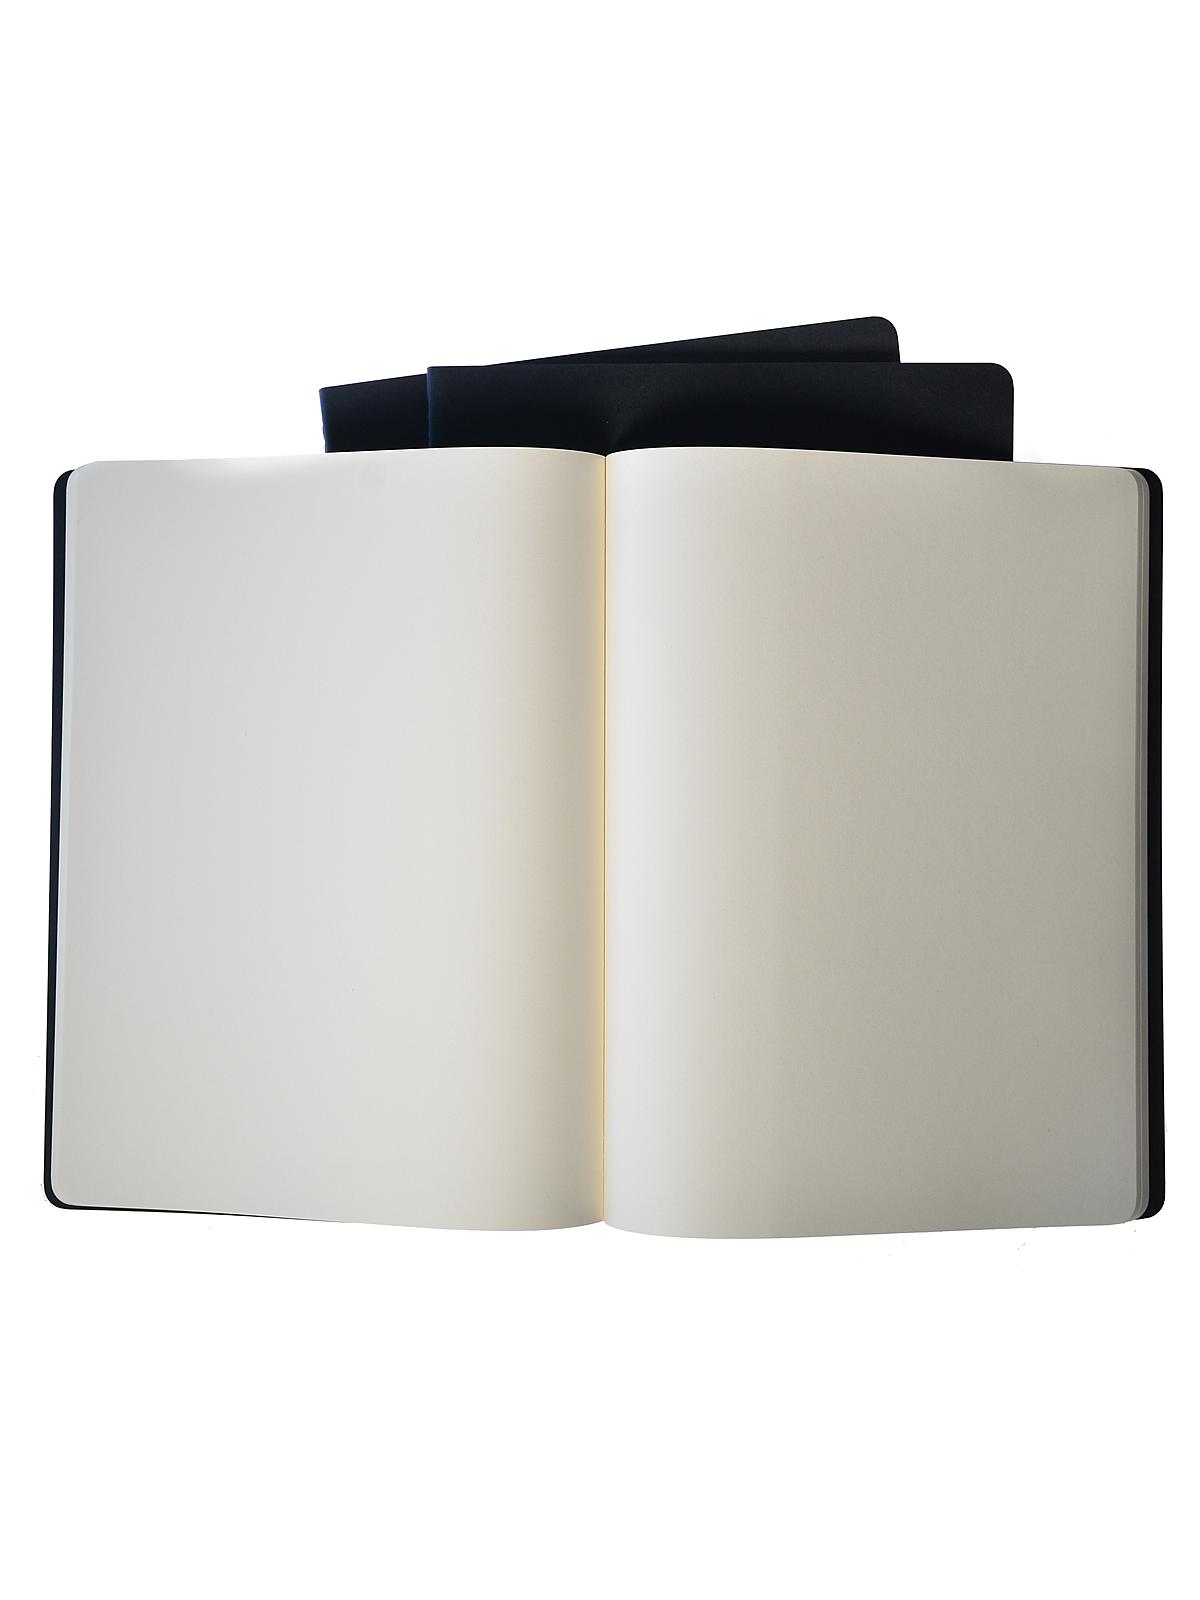 Cahier Journals Black, Blank 8 1 2 In. X 11 In. Pack Of 3, 120 Pages Each